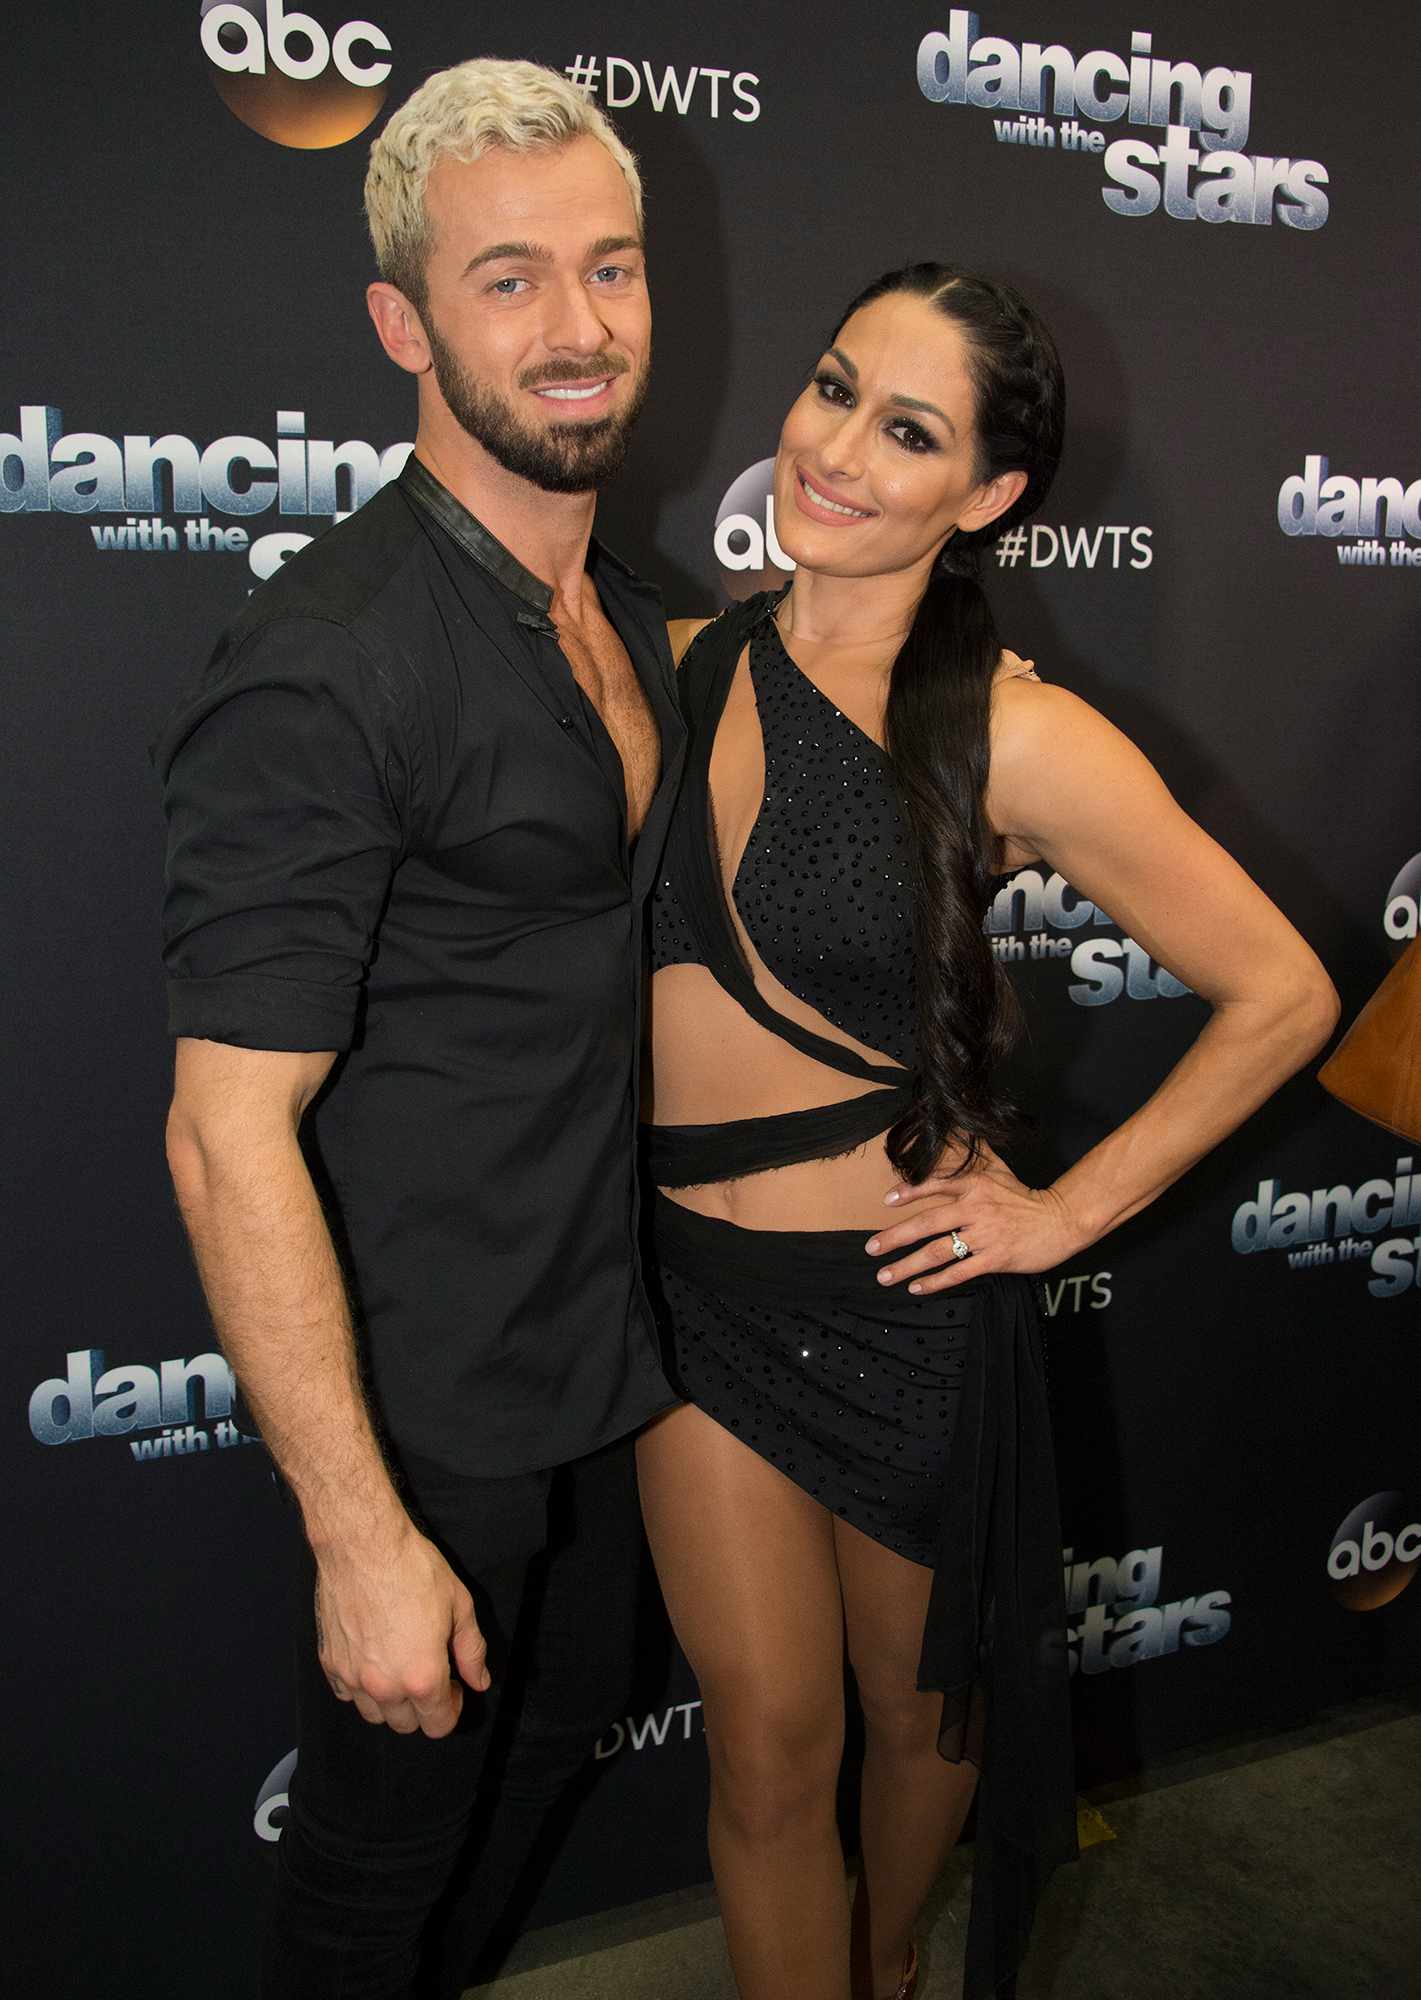 ABC's "Dancing With the Stars": Season 25 - Week Four